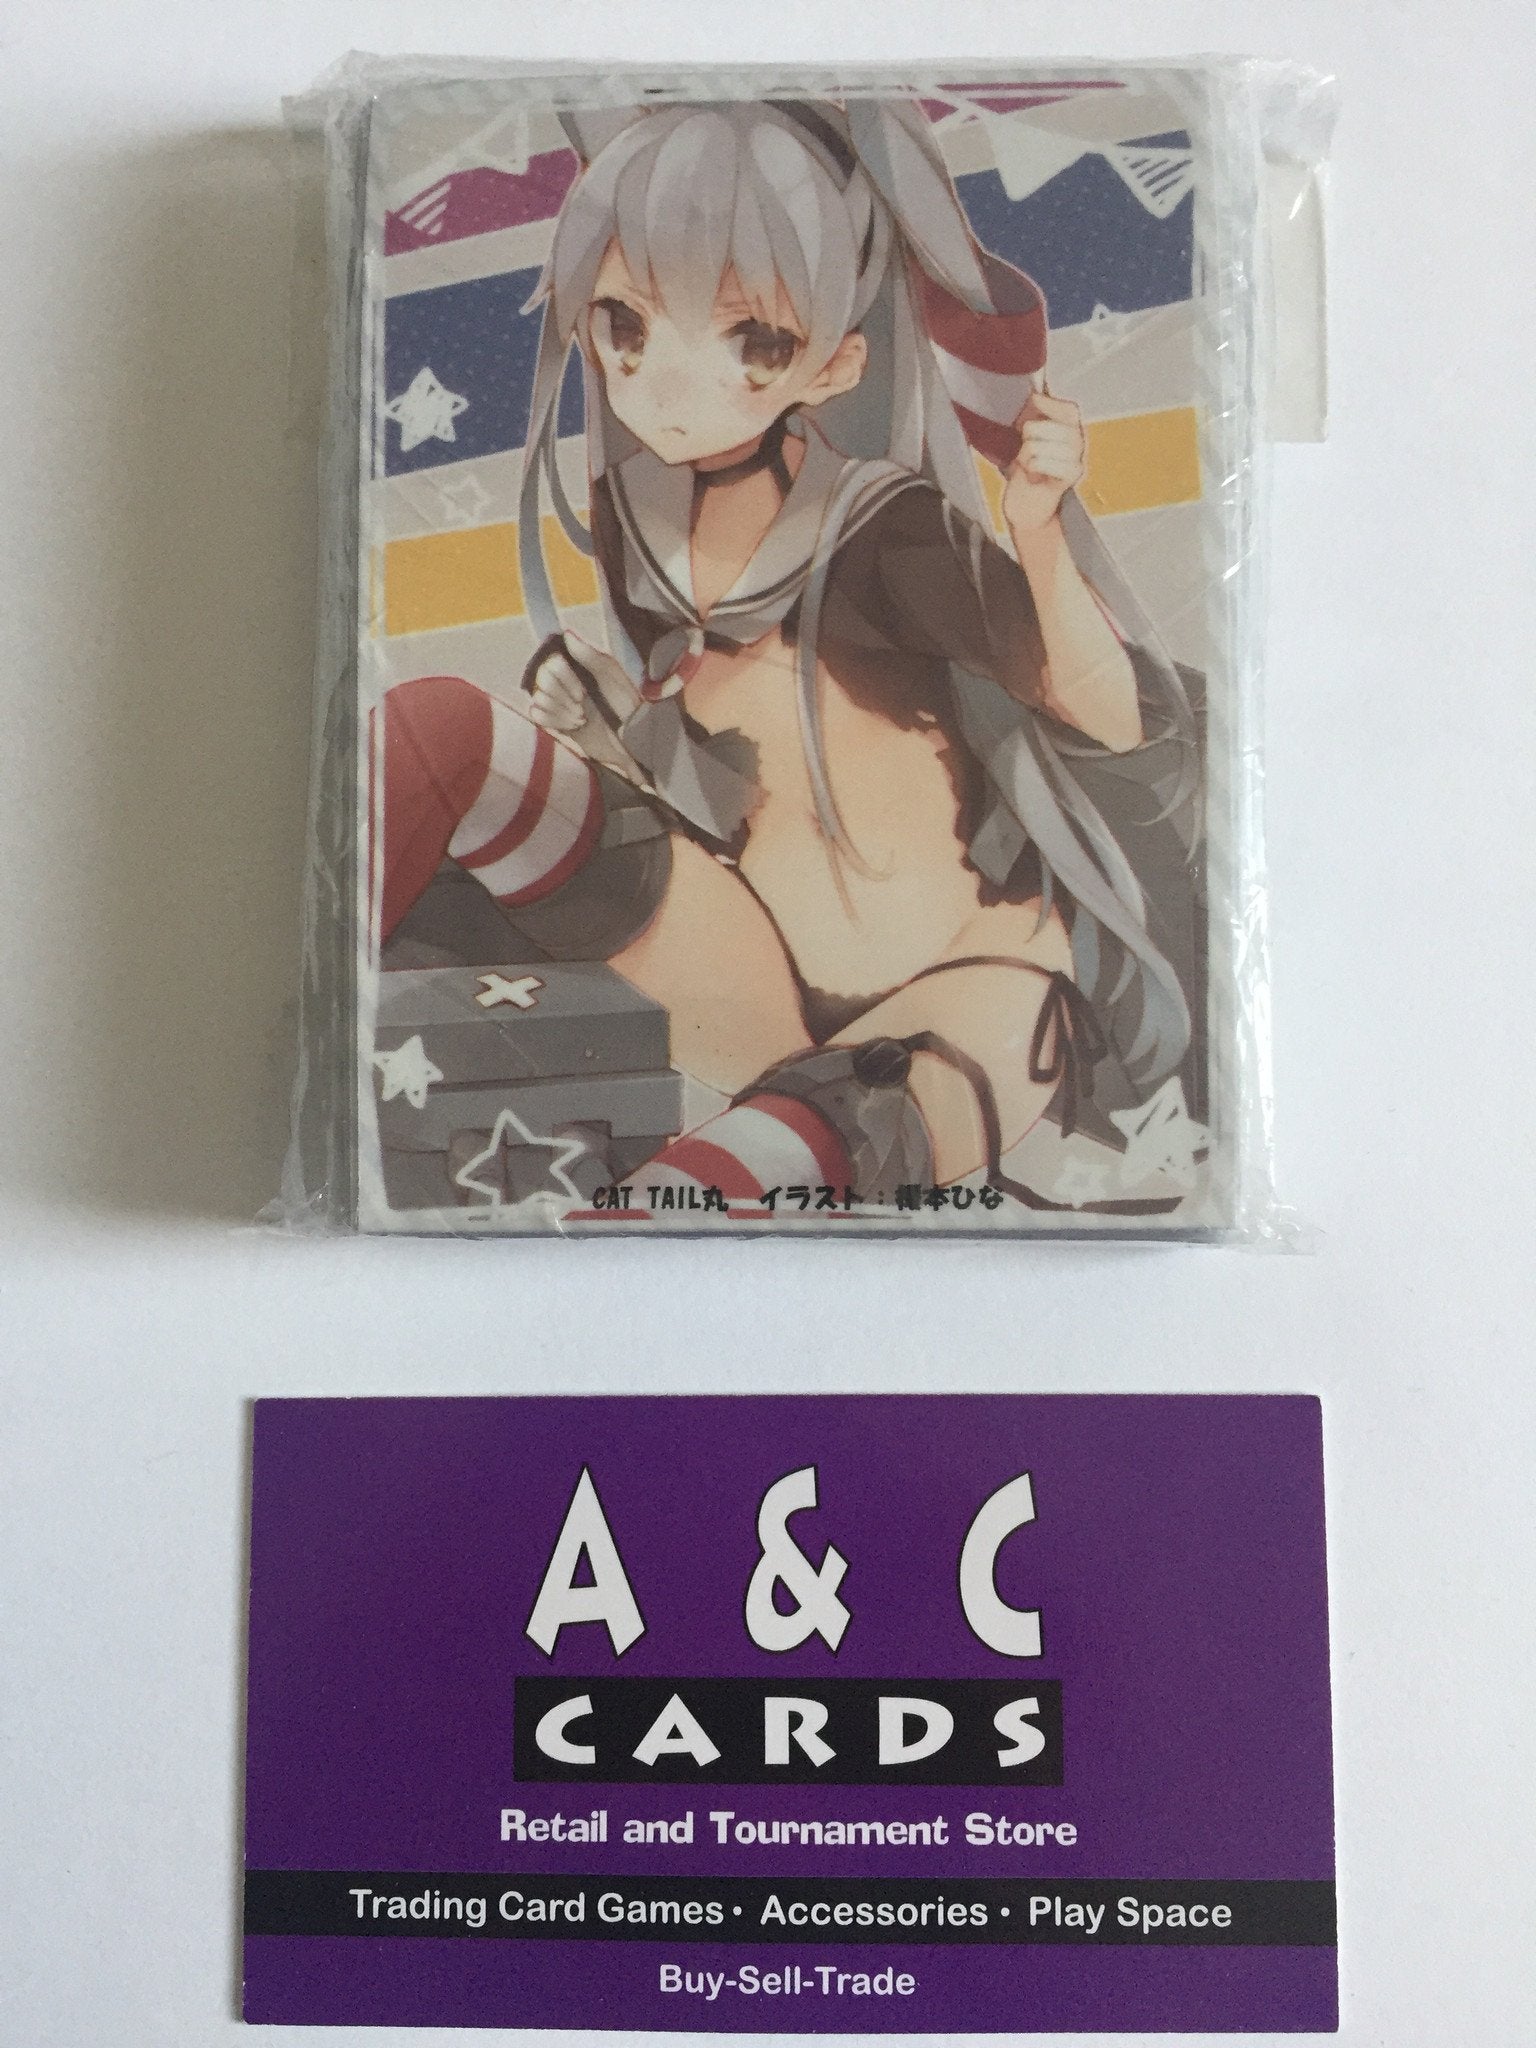 Character Sleeves "Amatsukaze" #2 - 1 pack of Standard Size Sleeves - Kantai Collection